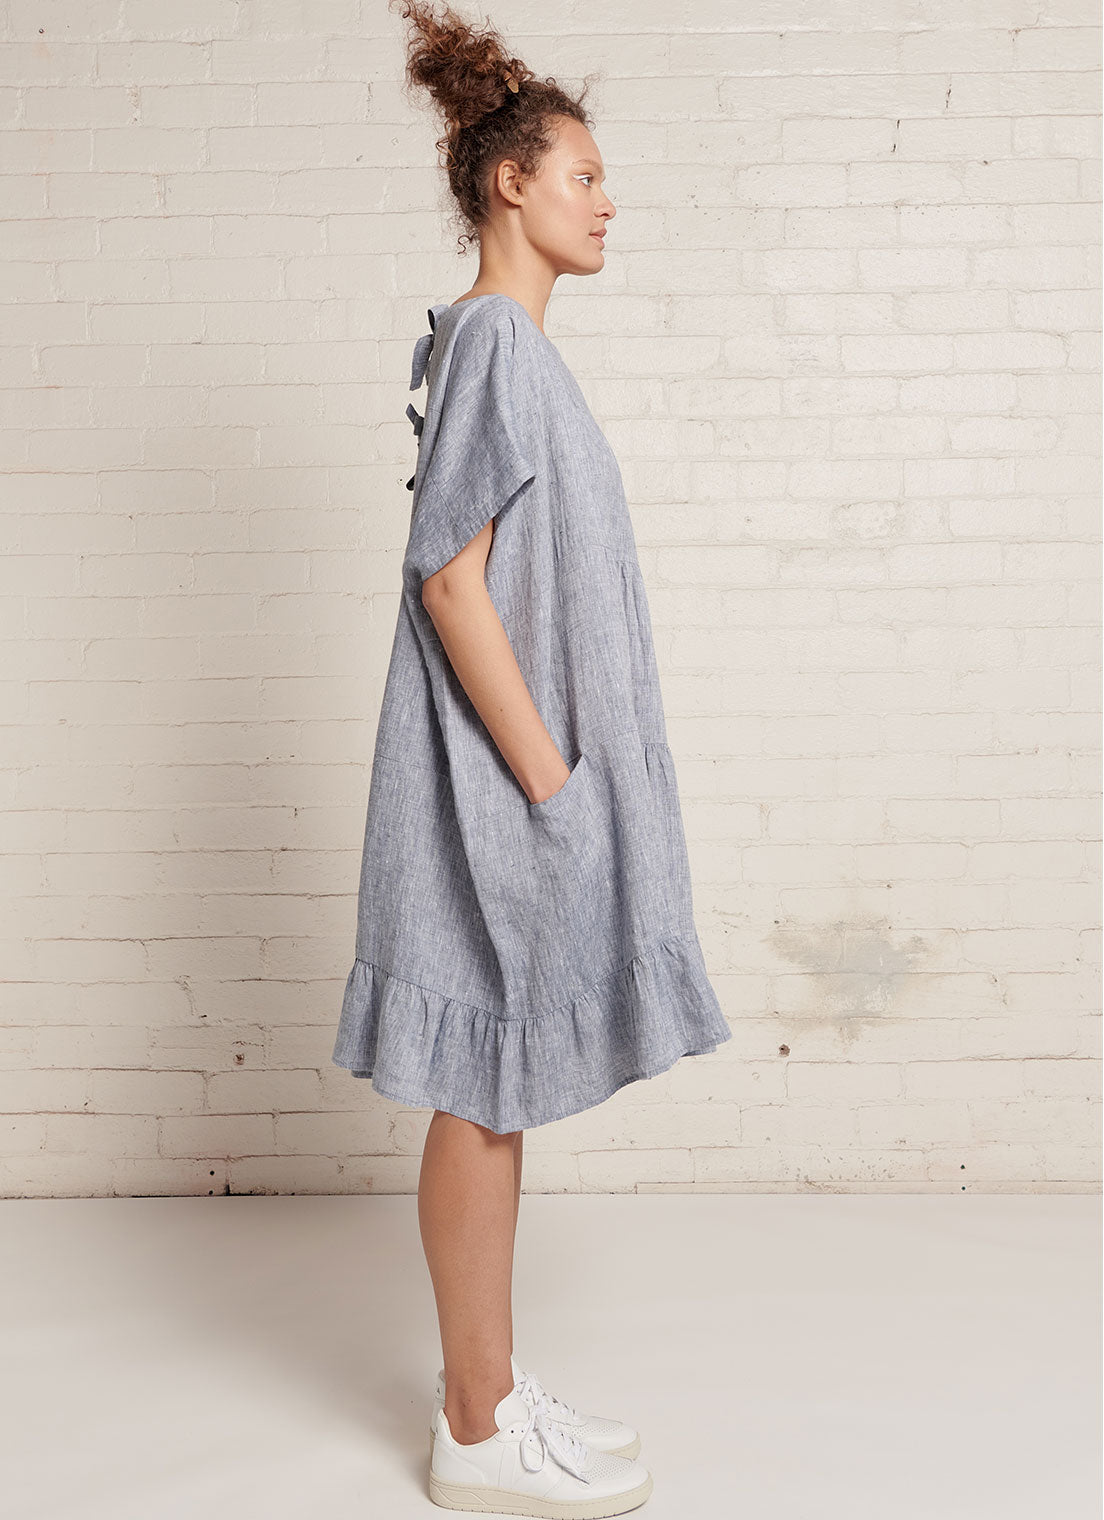 A denim, easy fit, knee-length, tiered dress with round neckline, short sleeves, tie closures at the back made from yarn dye washed linen